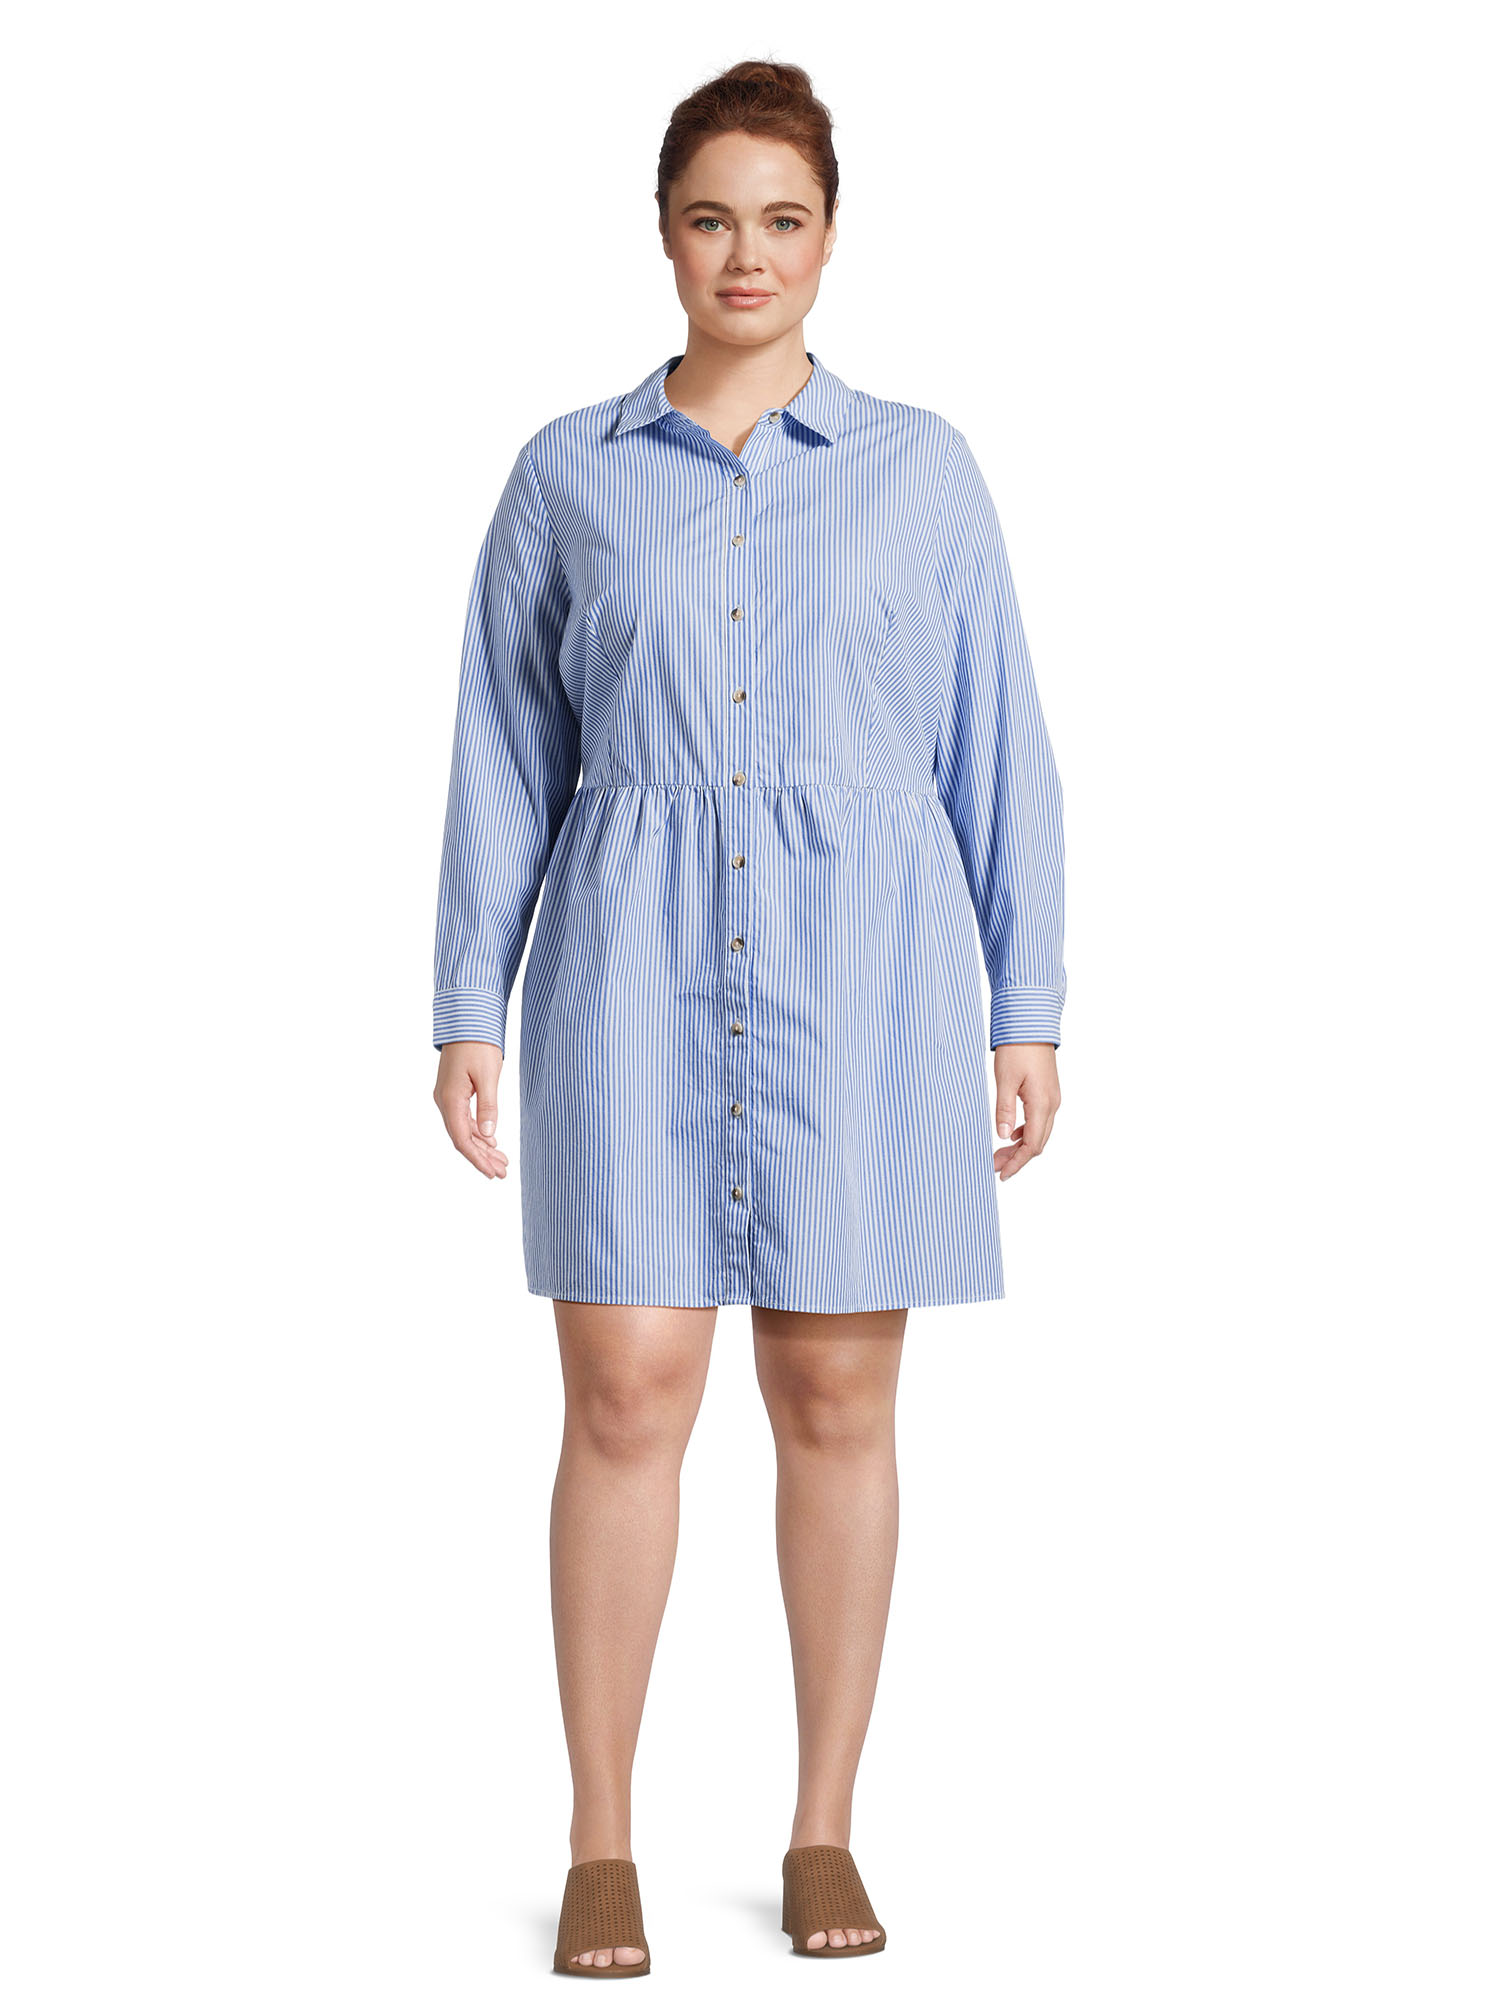 Nine.Eight Women's Plus Size Mini Shirtdress with Long Sleeves - image 2 of 6